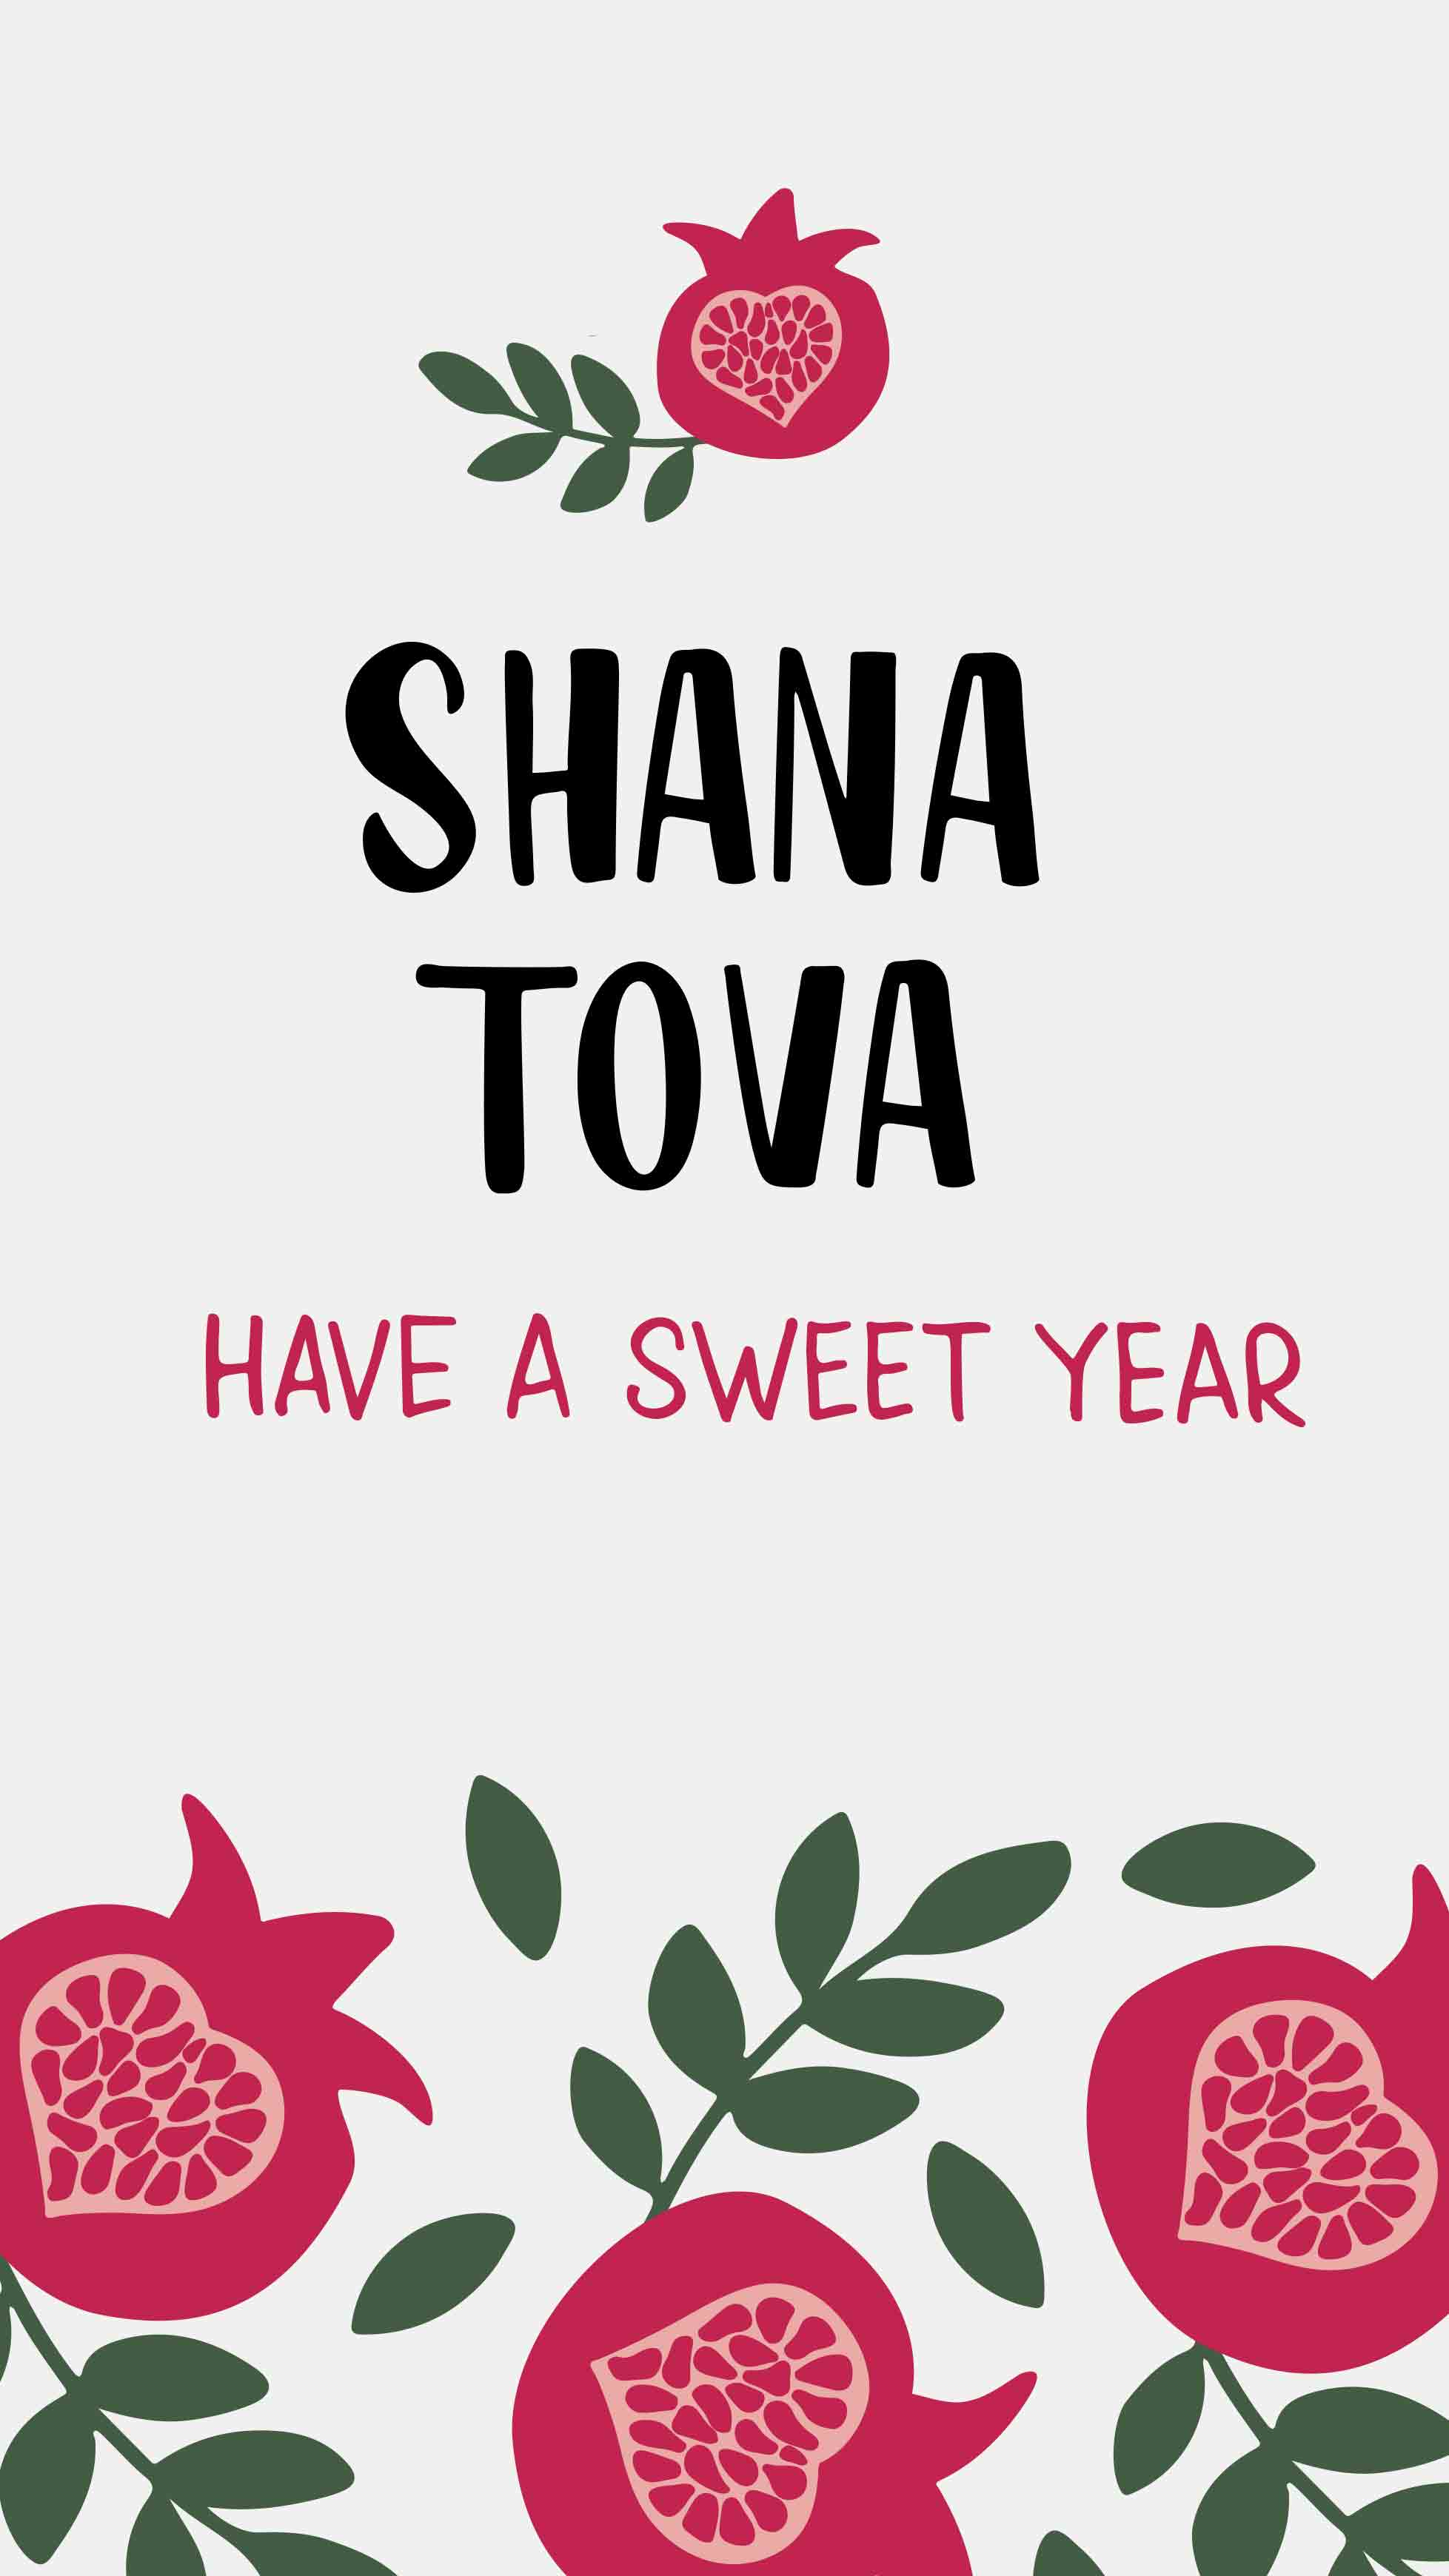 Have a Sweet Year